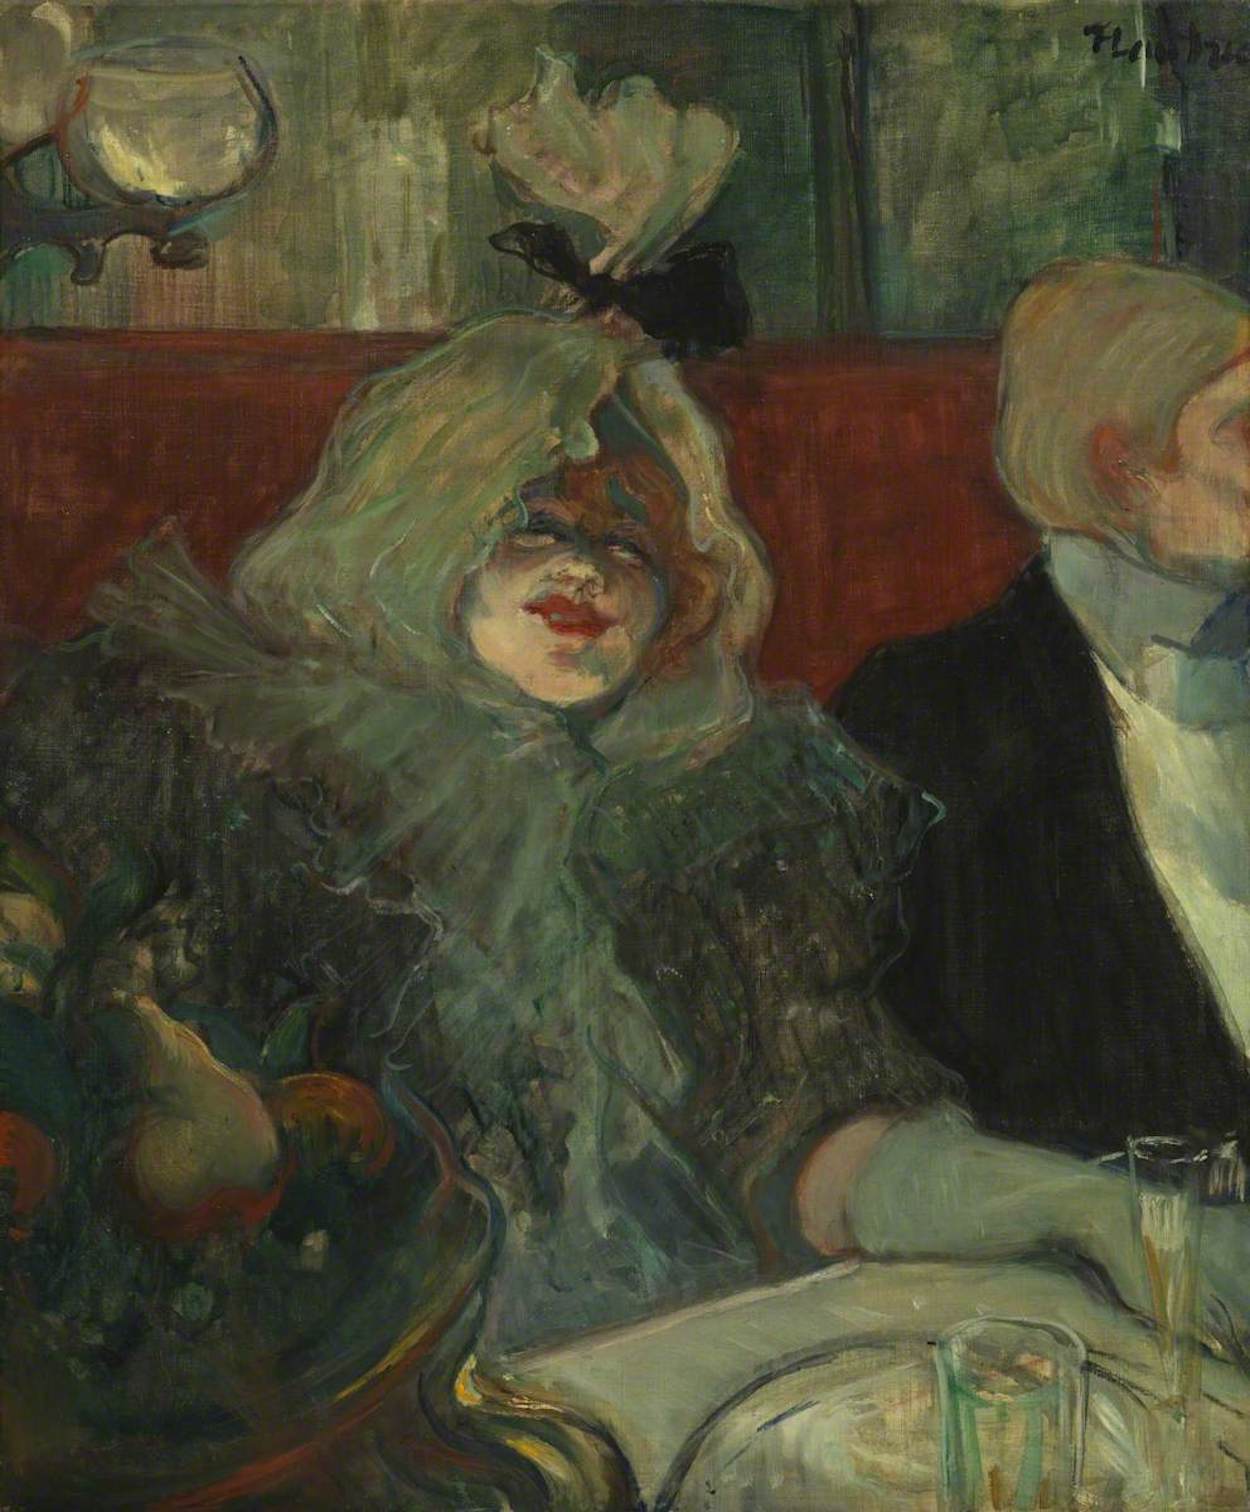 In a Private Dining Room by Henri de Toulouse-Lautrec - c. 1899 - 55.1 x 46 cm The Courtauld Gallery